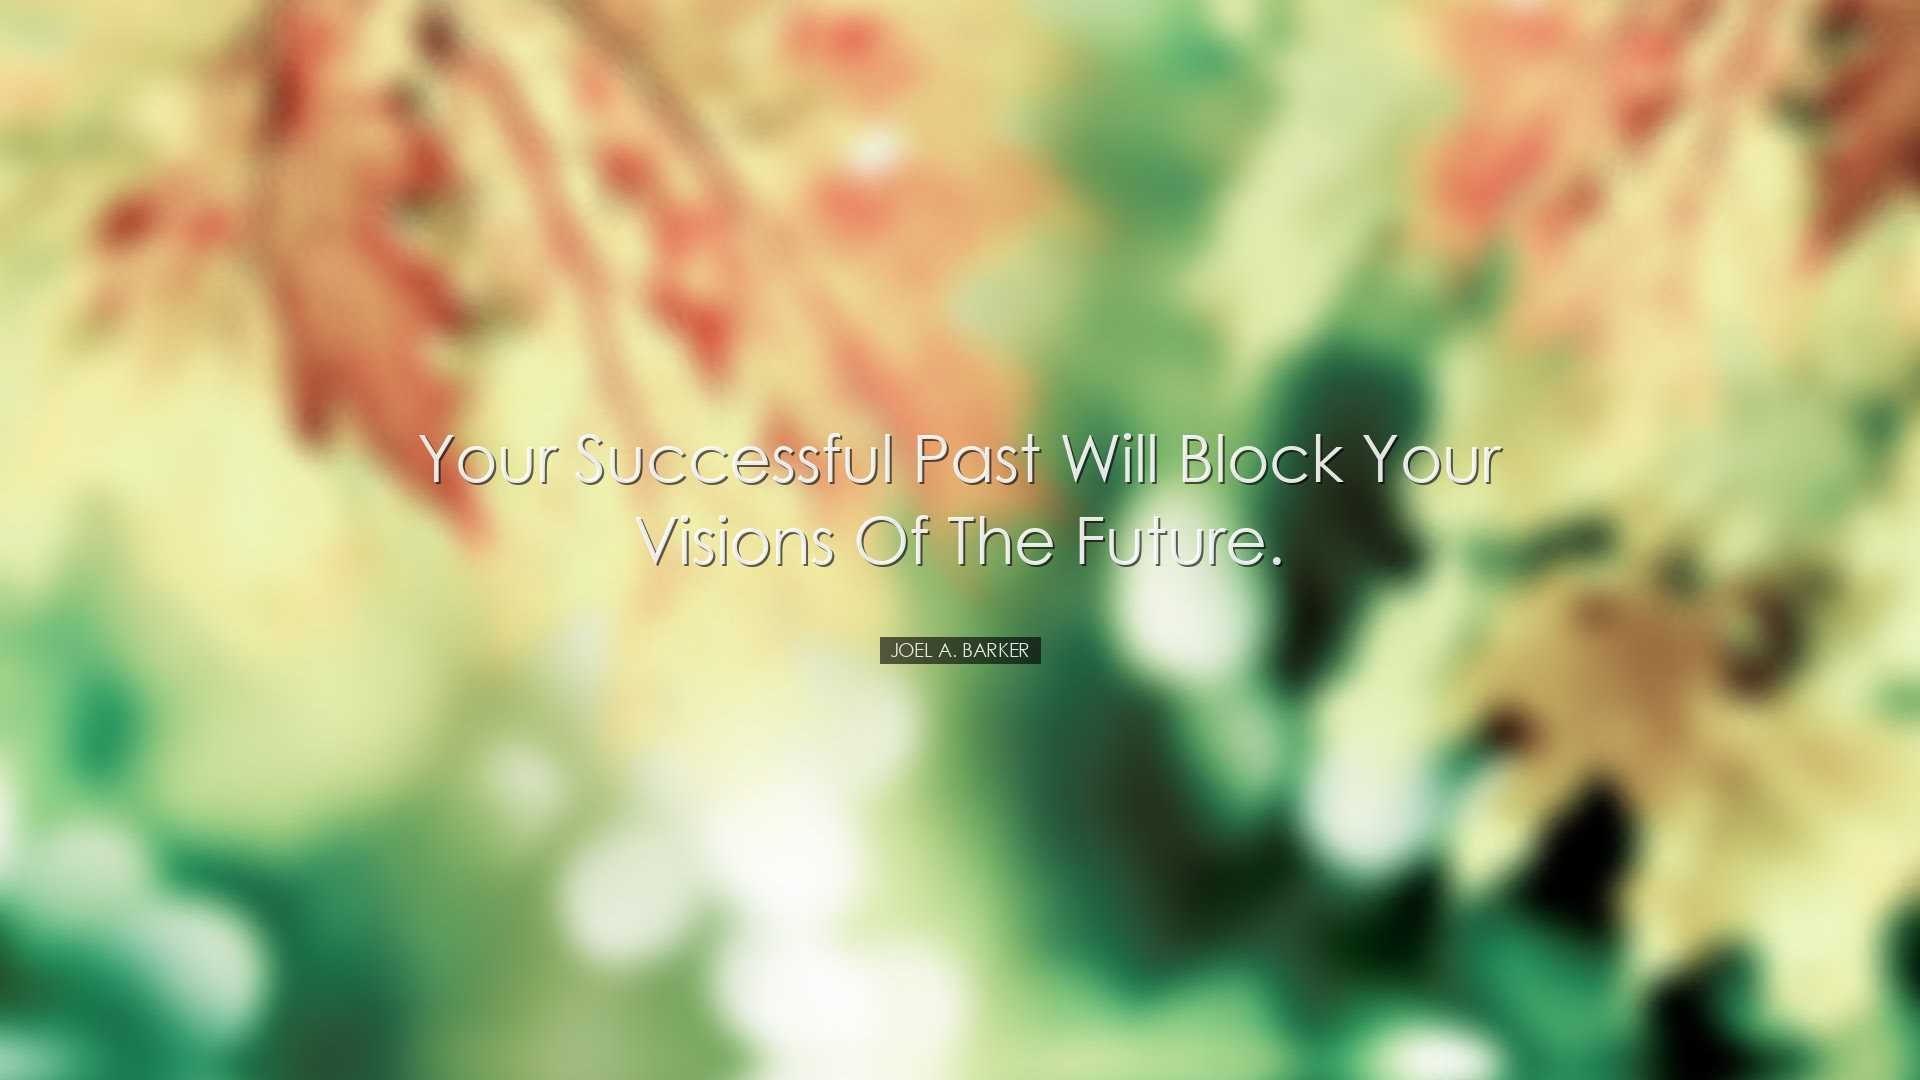 Your successful past will block your visions of the future. - Joel